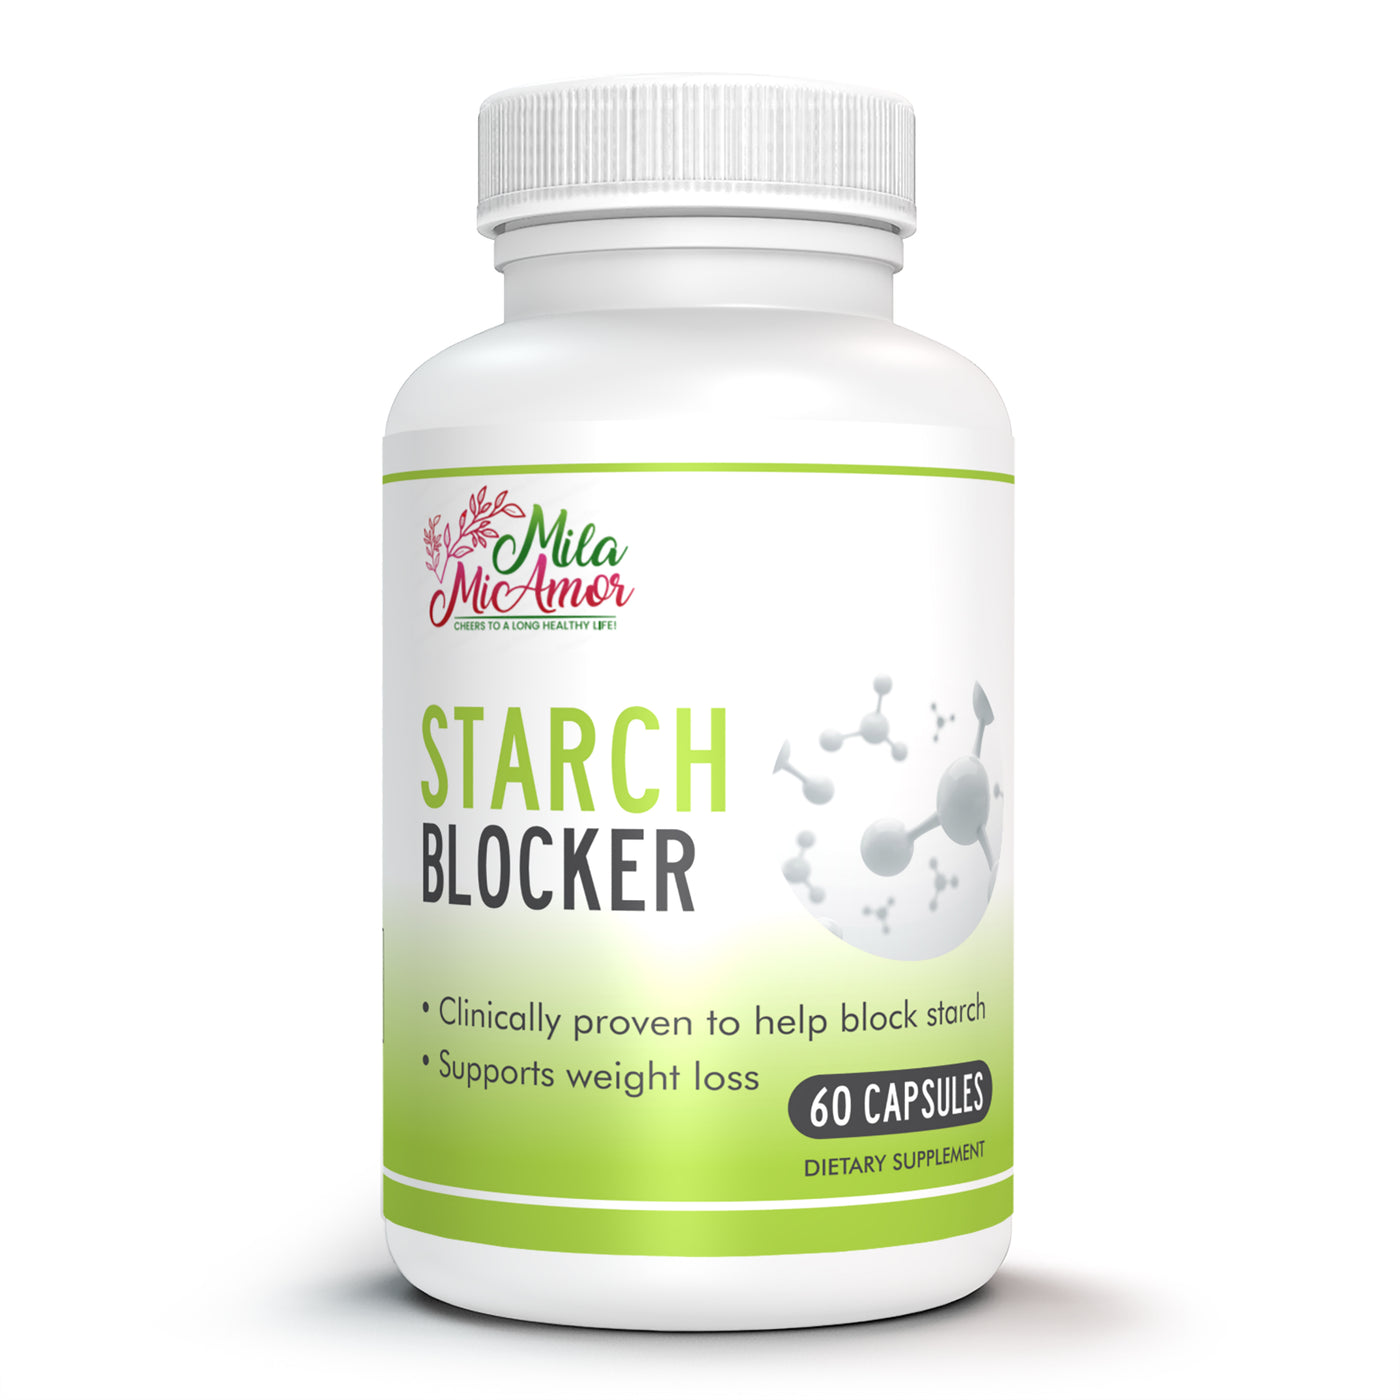 Cheat Day Kit | Caffeine Free | Starch Blocker | Weight Loss | 15 Day Cleanse - Gut and Colon Support | Cheat & Eat | Made in USA